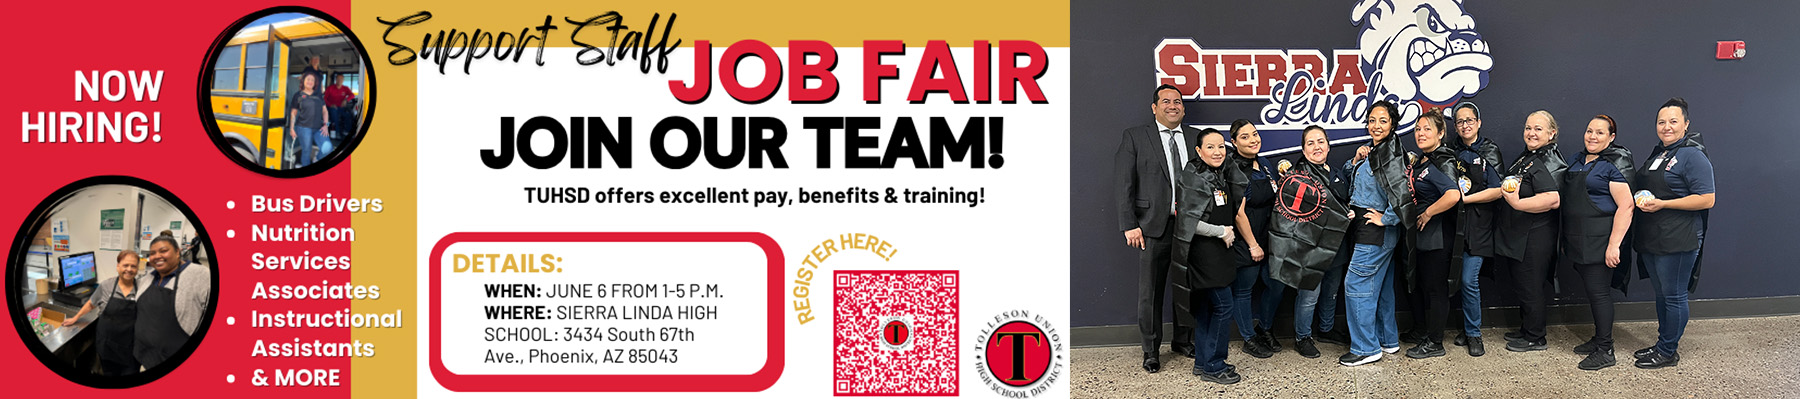 TUHSD Job Fair- we offer excellent pay, benefits, & training! Hiring bus drivers, nutrition services associates, instructional assistants & more. June 6 from 1-5 pm at Sierra Linda HS in Phoenix, AZ 85043 | Sierra Linda students with S